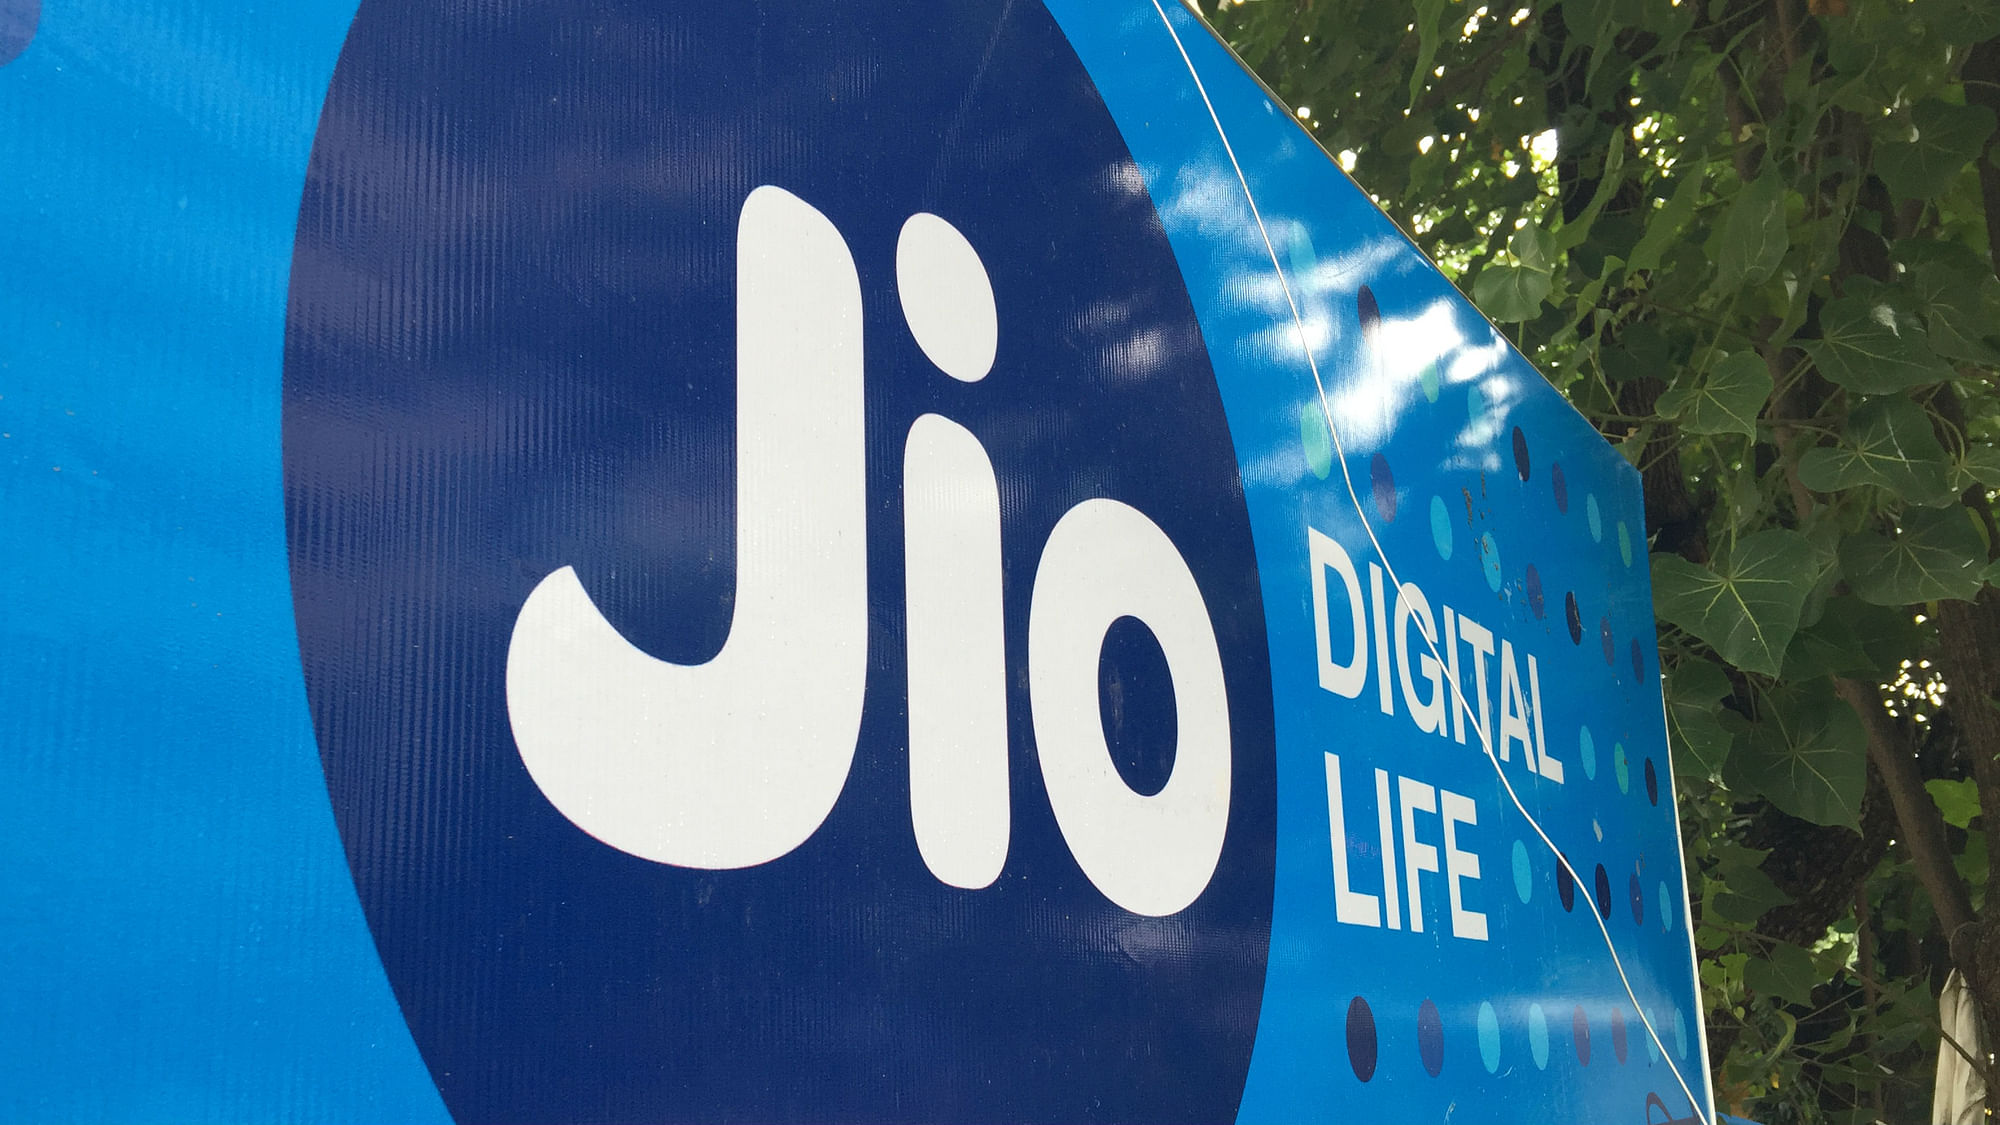 Reliance Jio 4G has not even officially launched yet. (Photo: <b>BloombergQuint</b>)